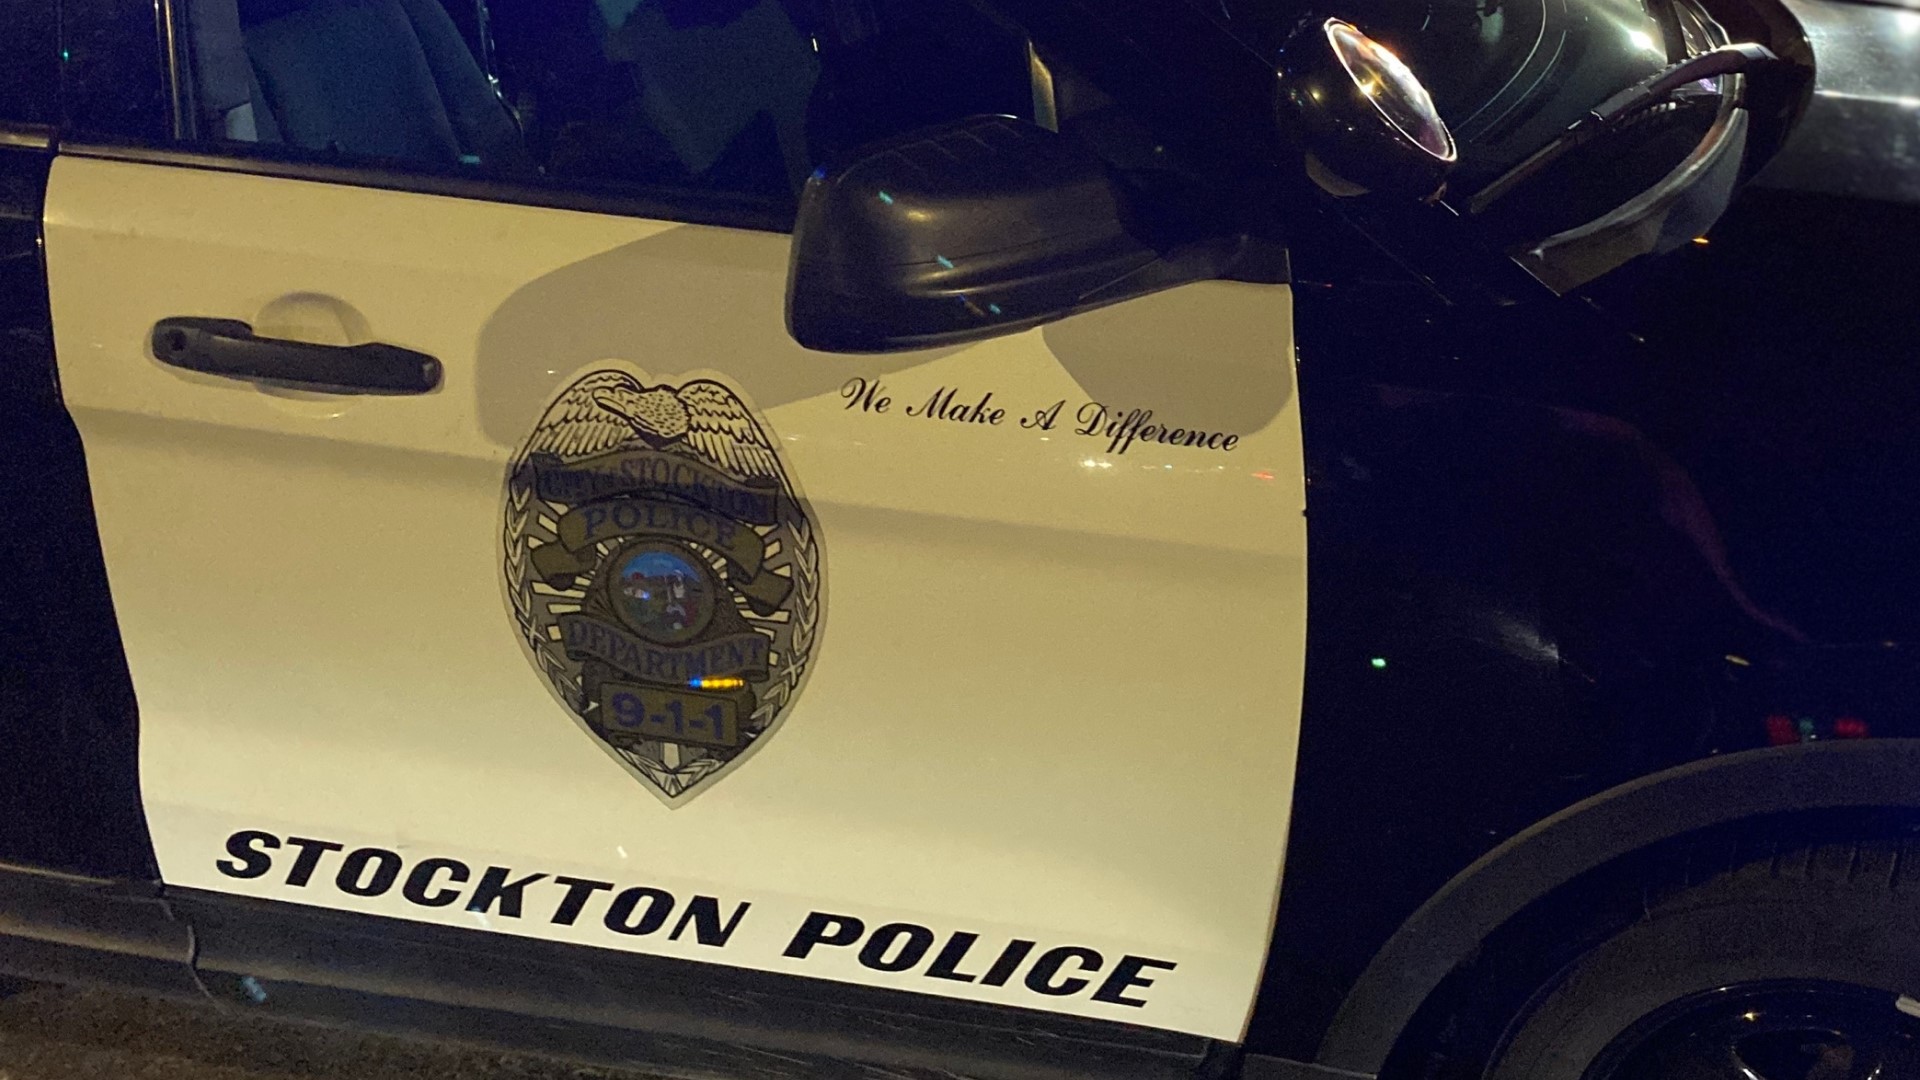 Stockton Police say at least 50% of homicides reported this year have been gang-related while the rest are from interpersonal conflict or random acts of violence.